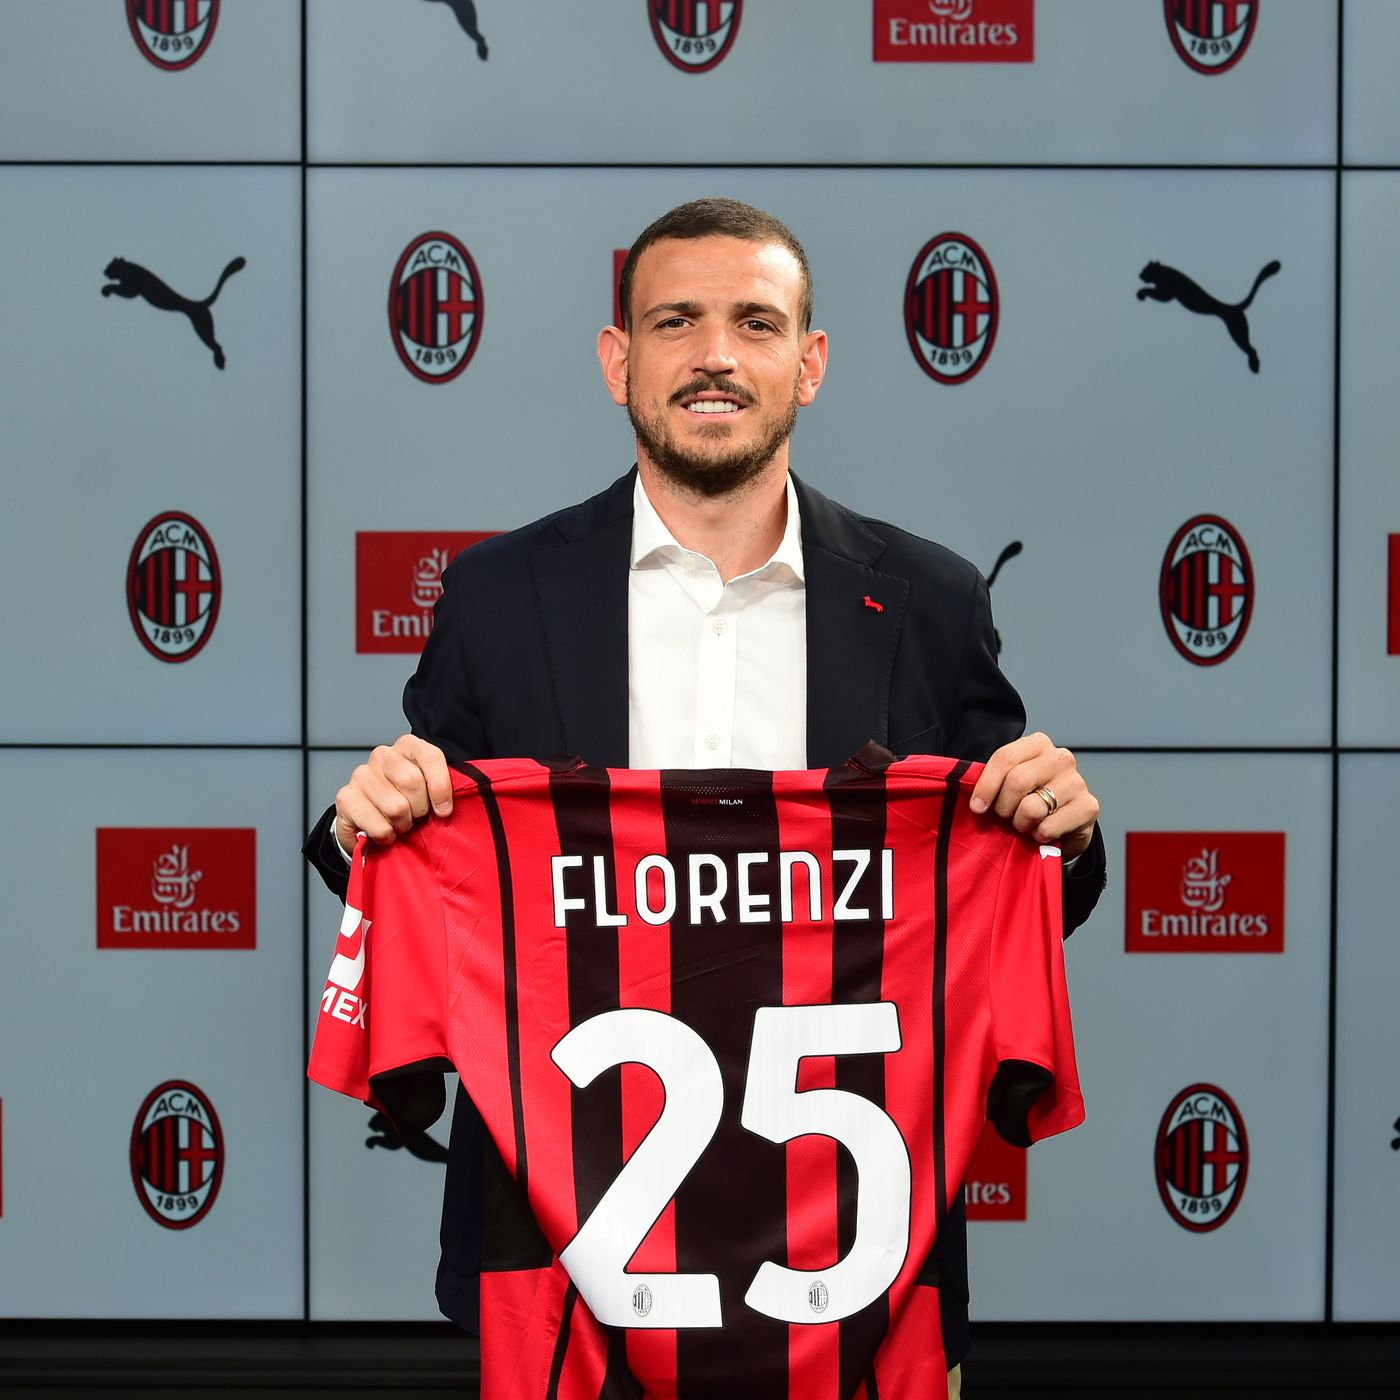 The city Towing Melting Official: Alessandro Florenzi Loaned to AC Milan - Chiesa Di Totti